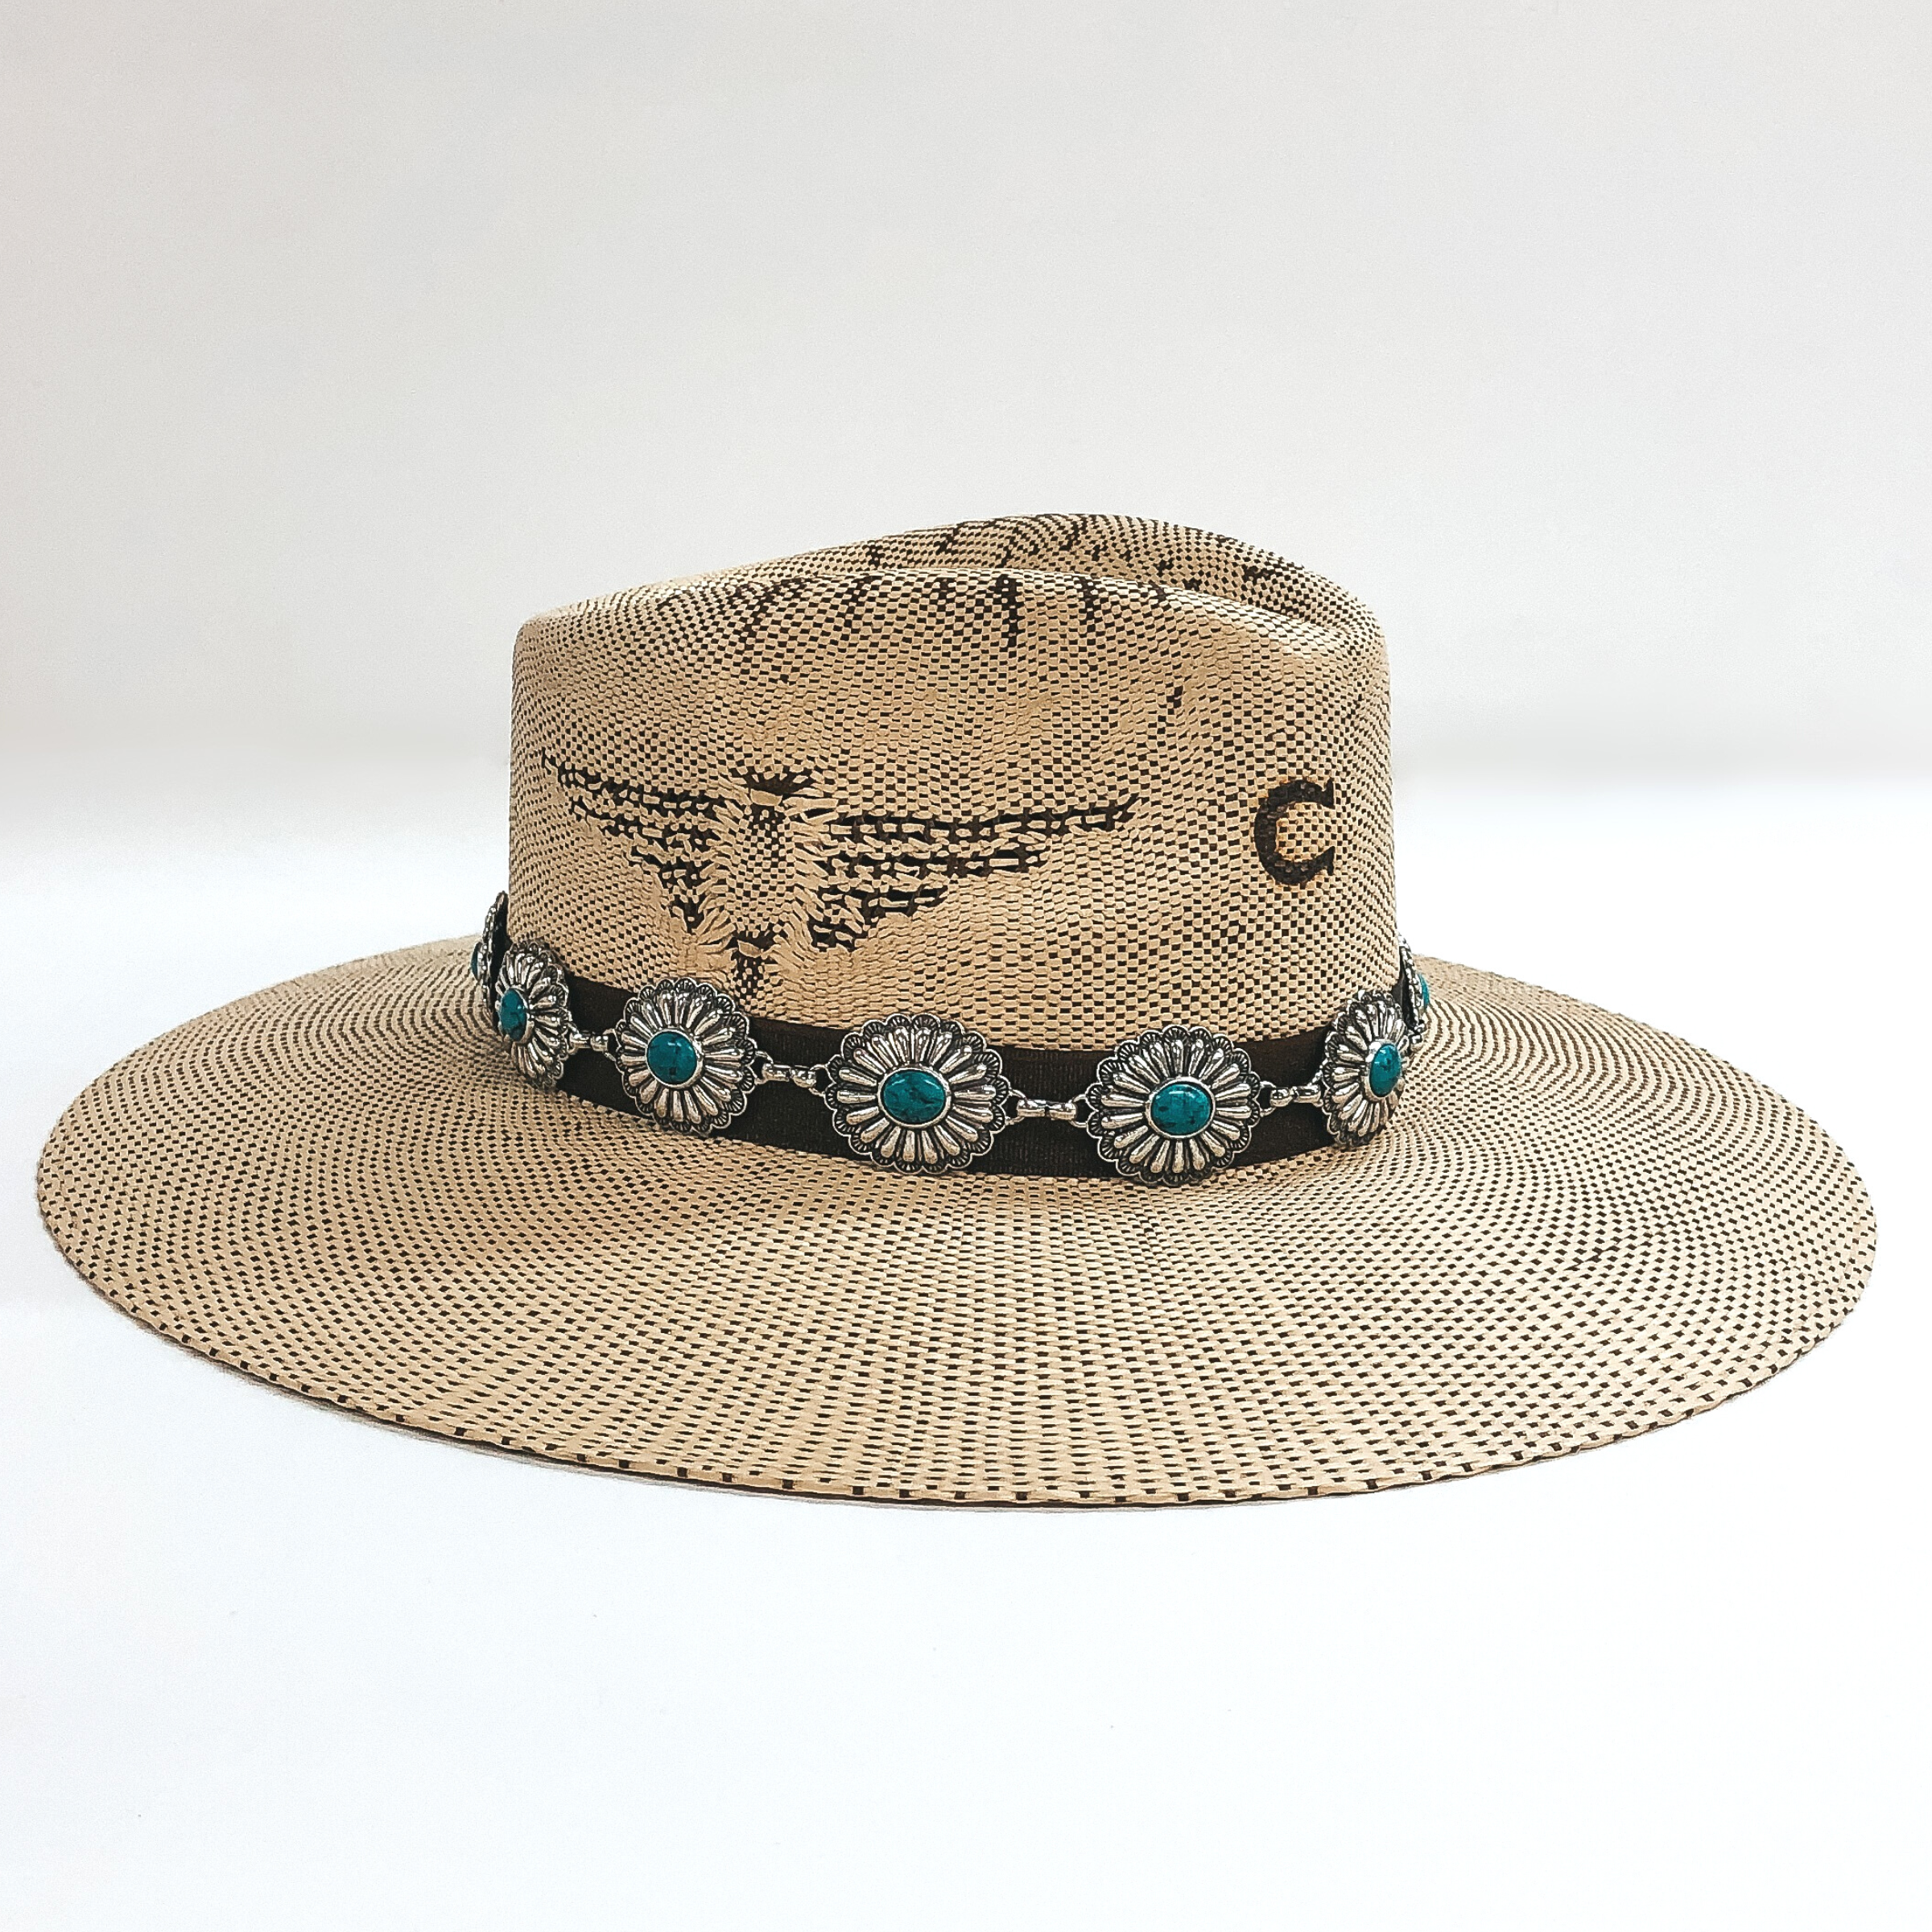 Silver Tone Oval Concho Hat Band with Large Faux Turquoise Stones - Giddy Up Glamour Boutique